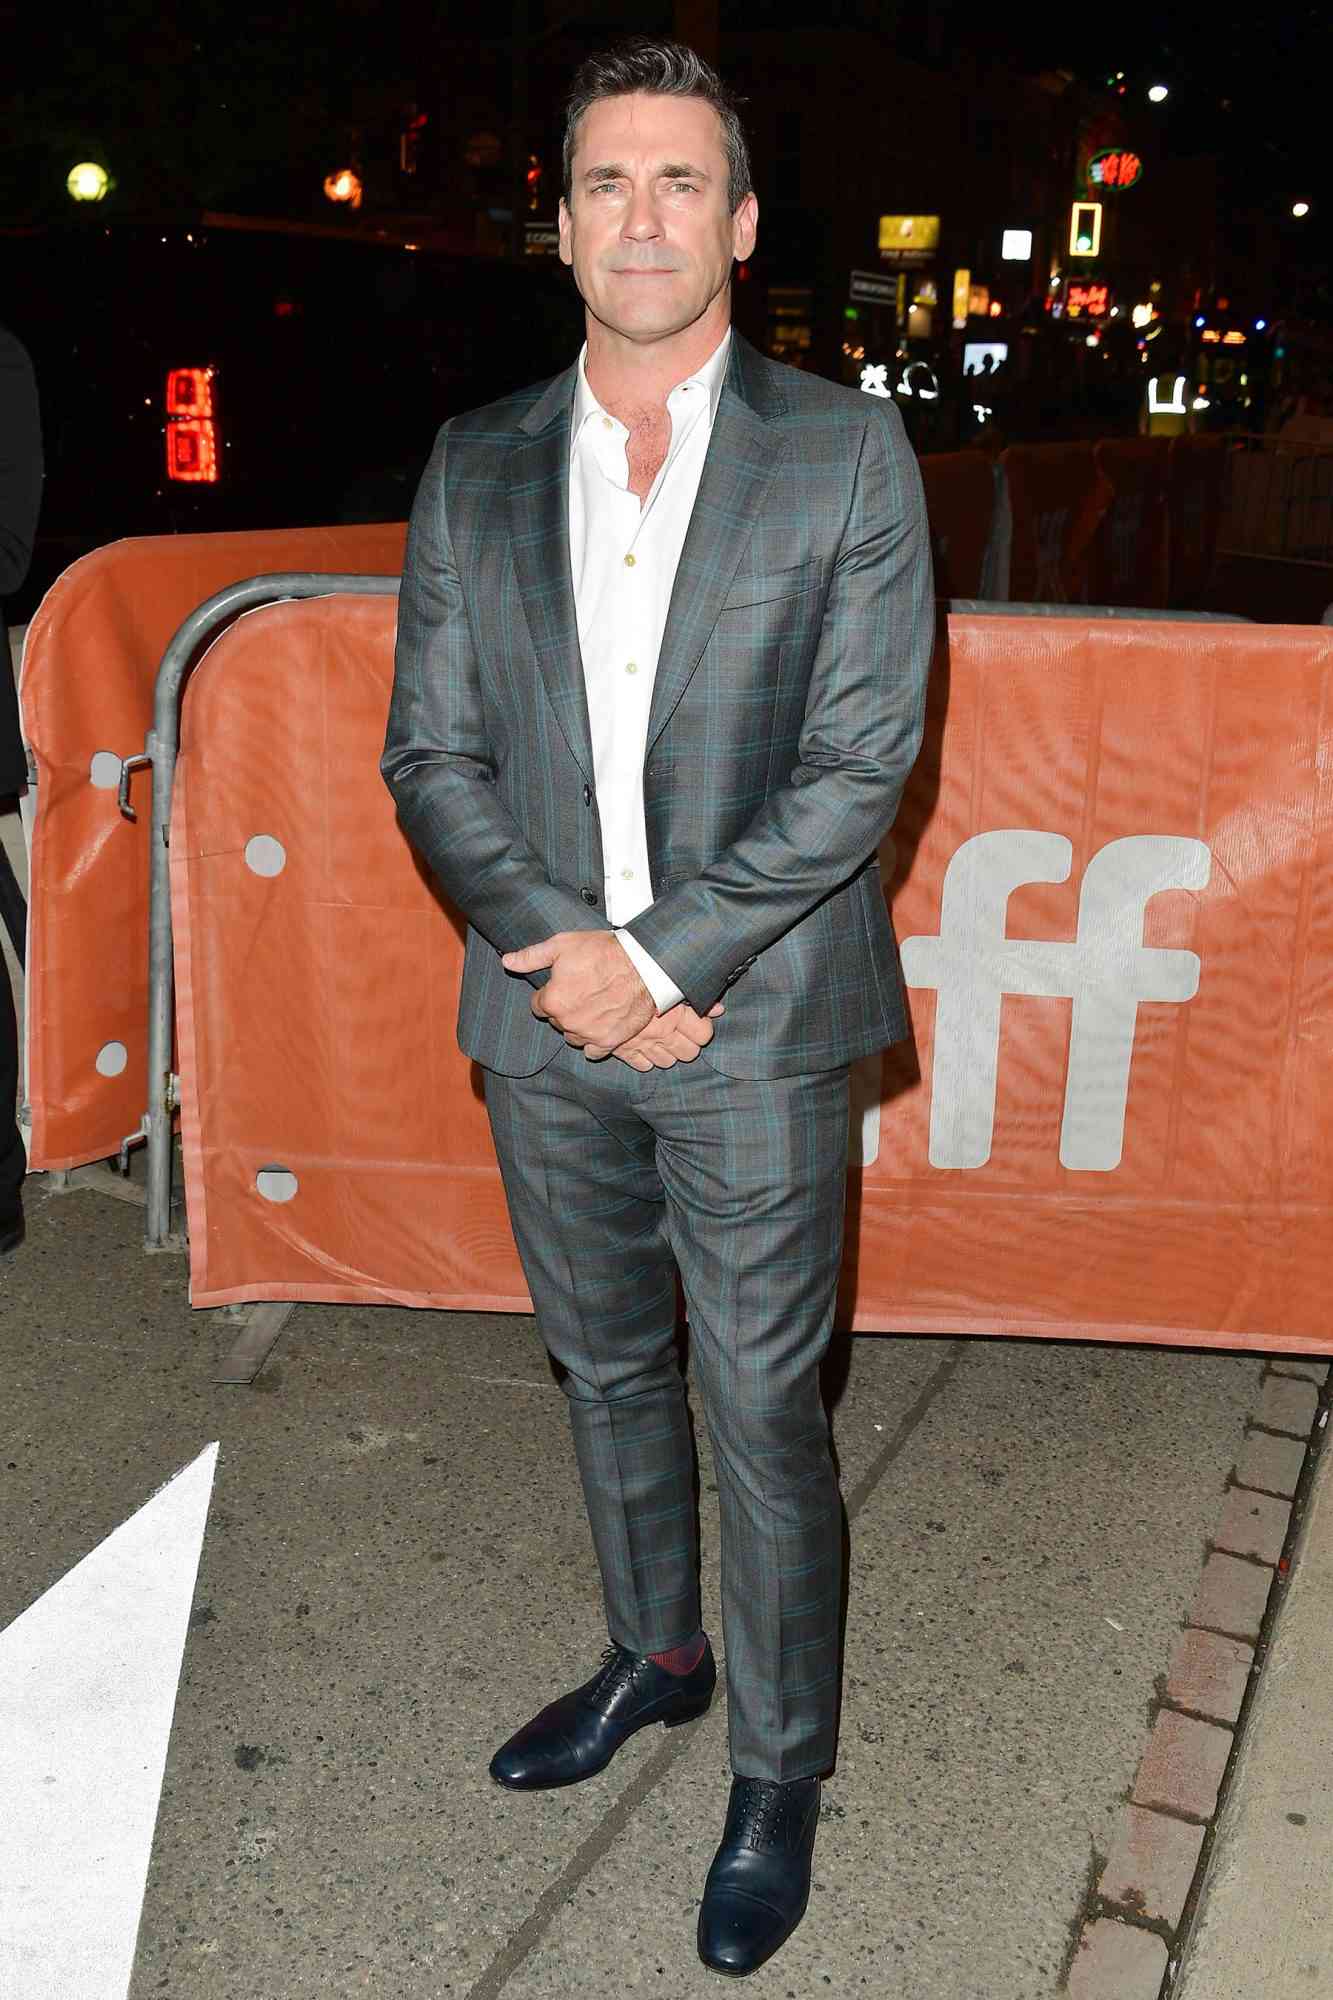 2019 Toronto International Film Festival - "Lucy In The Sky" Premiere - Red Carpet